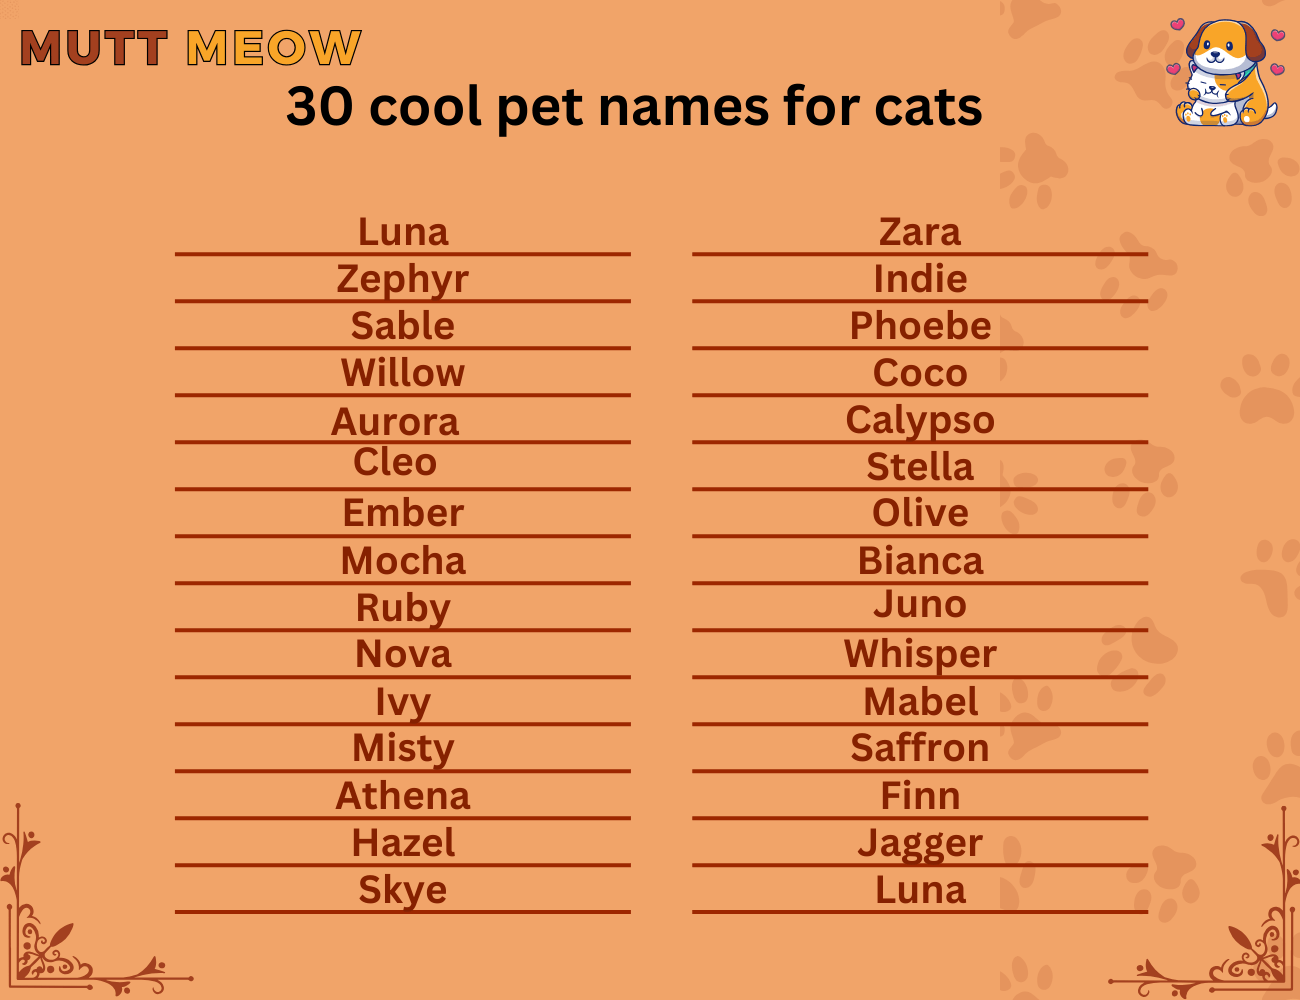 30 cool pet names for cats